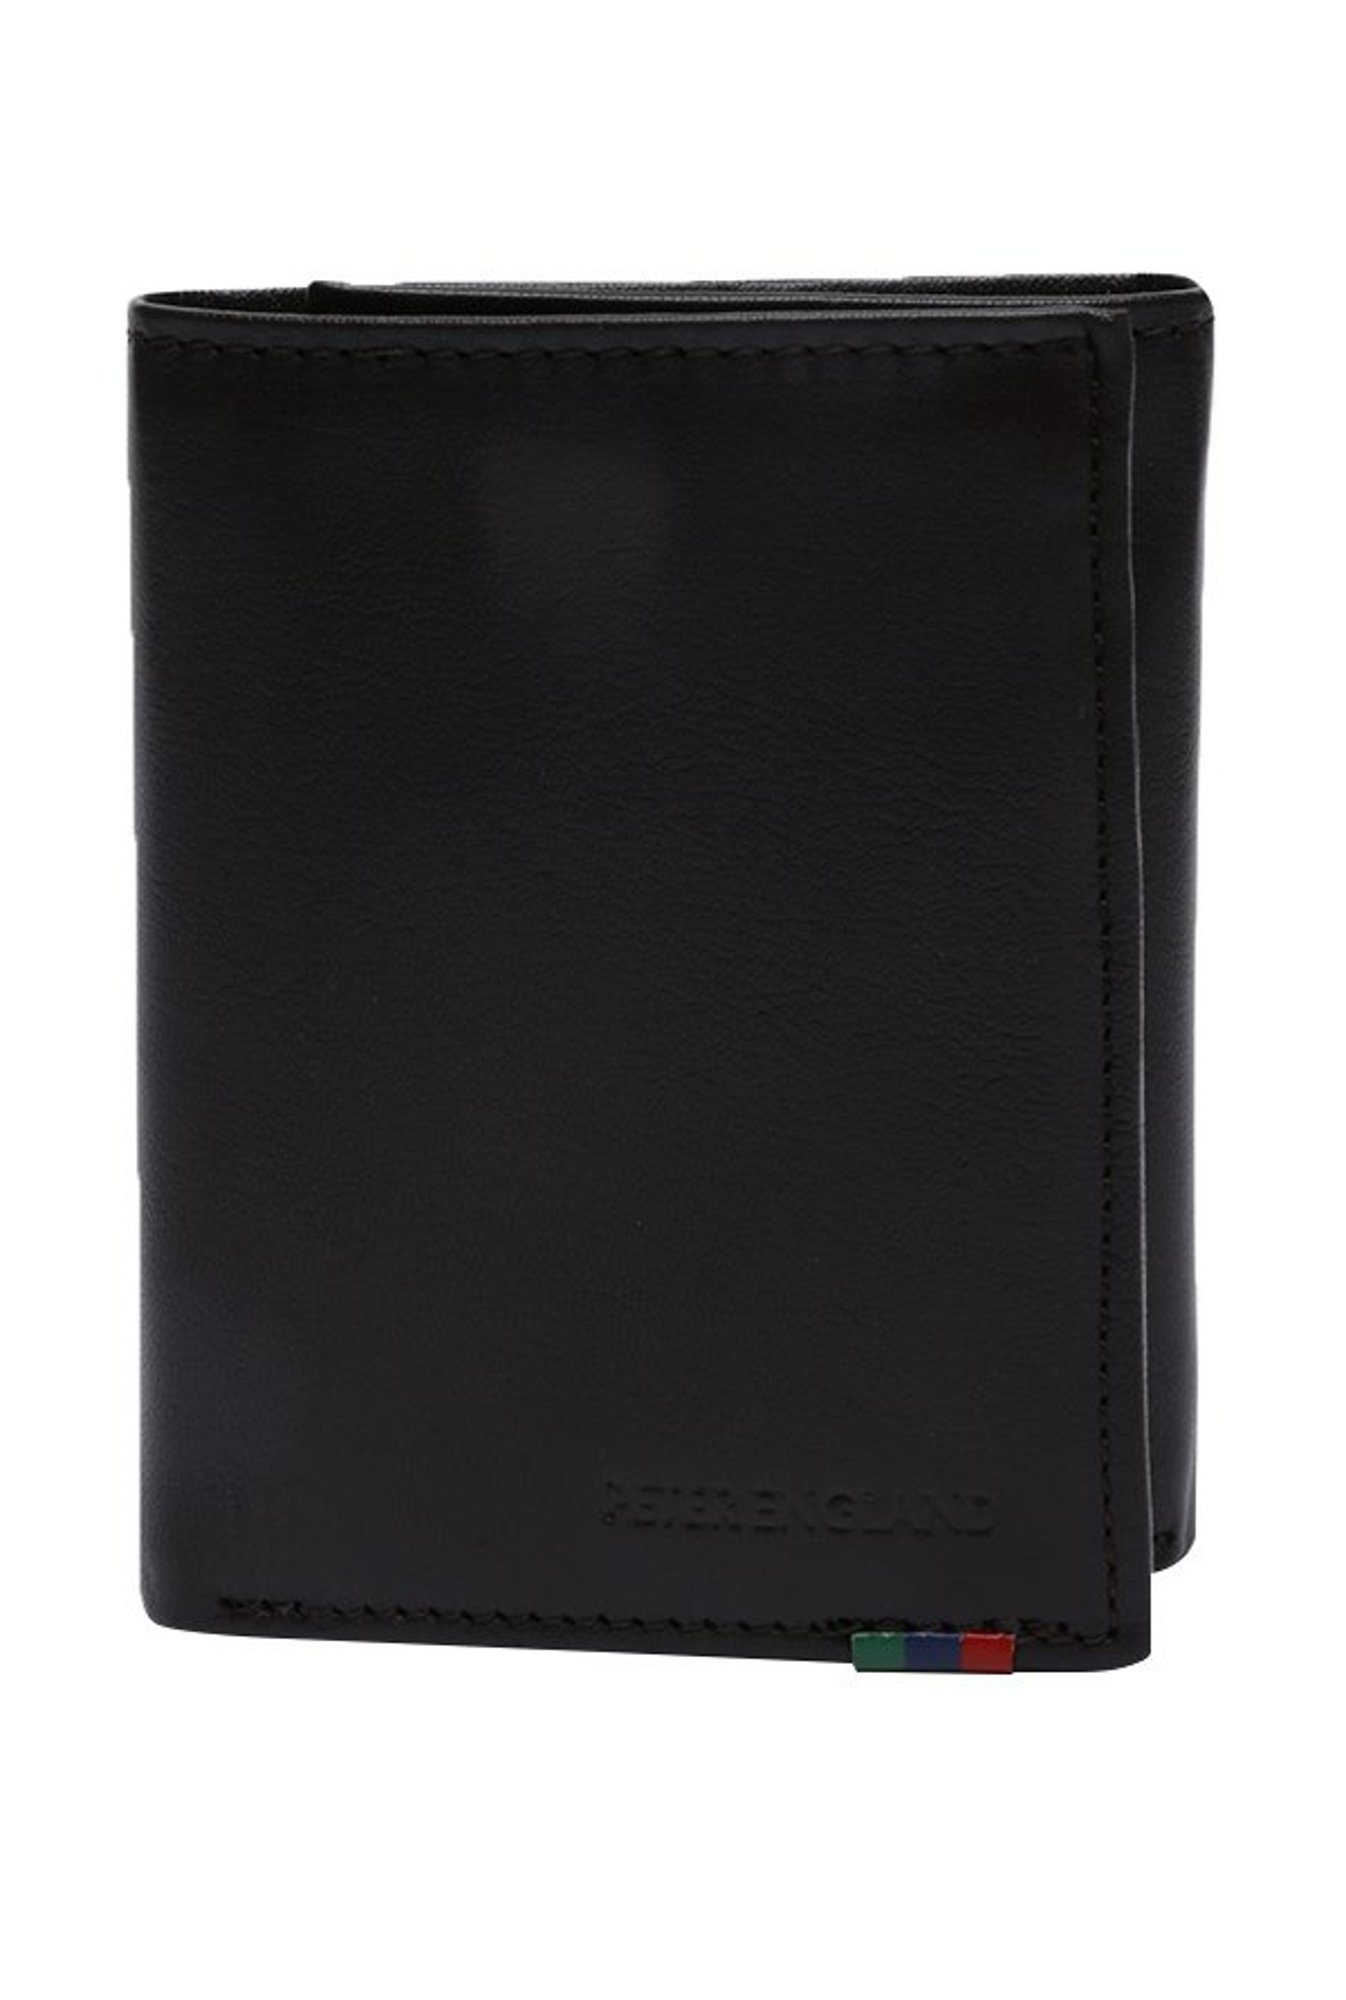 Peter England Red Red Wallet at Rs 720/piece in Bengaluru | ID: 18747133873